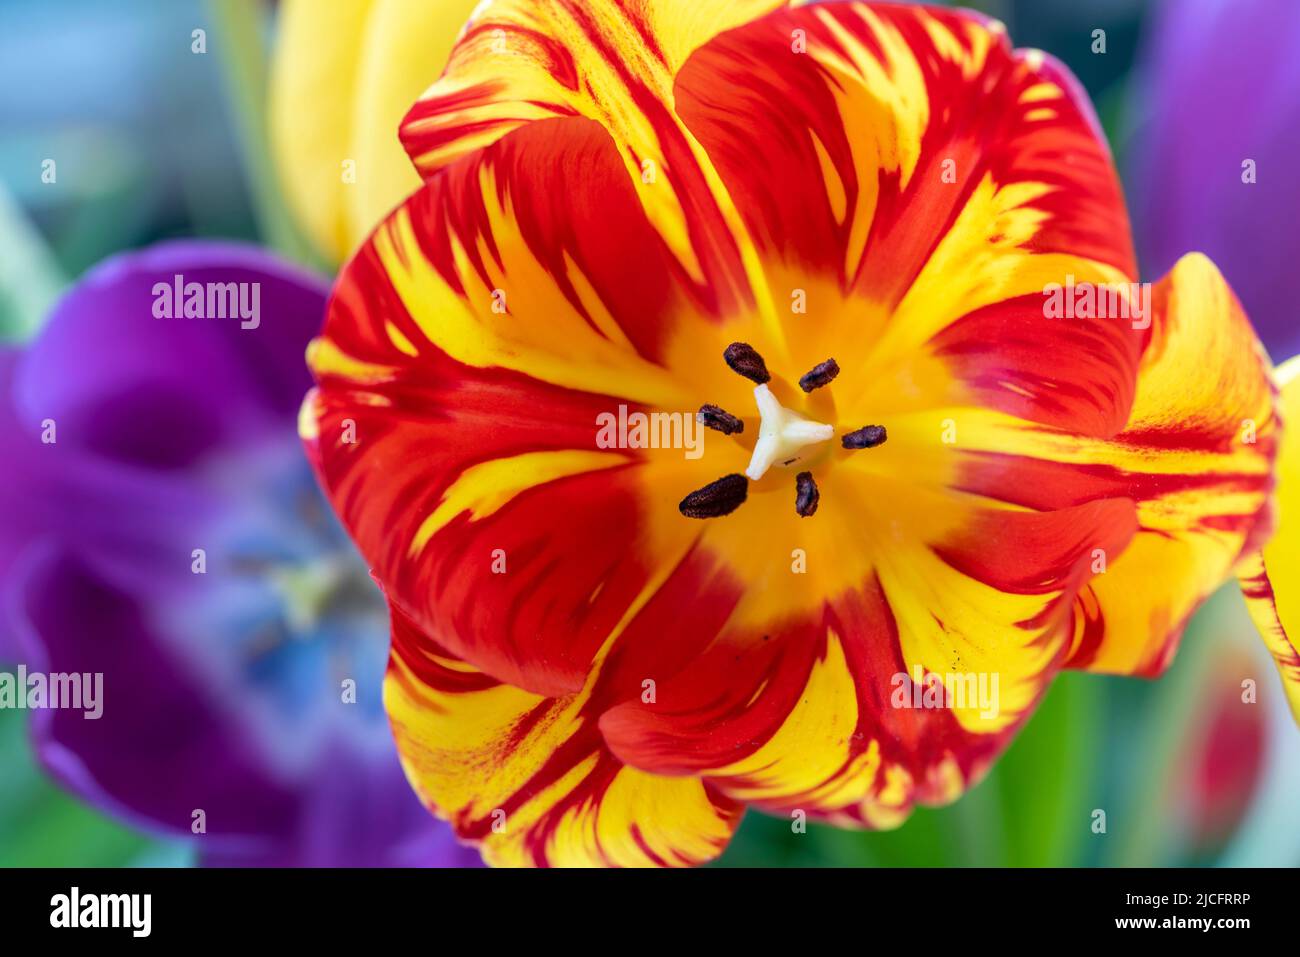 The flower of a tulip. Stock Photo